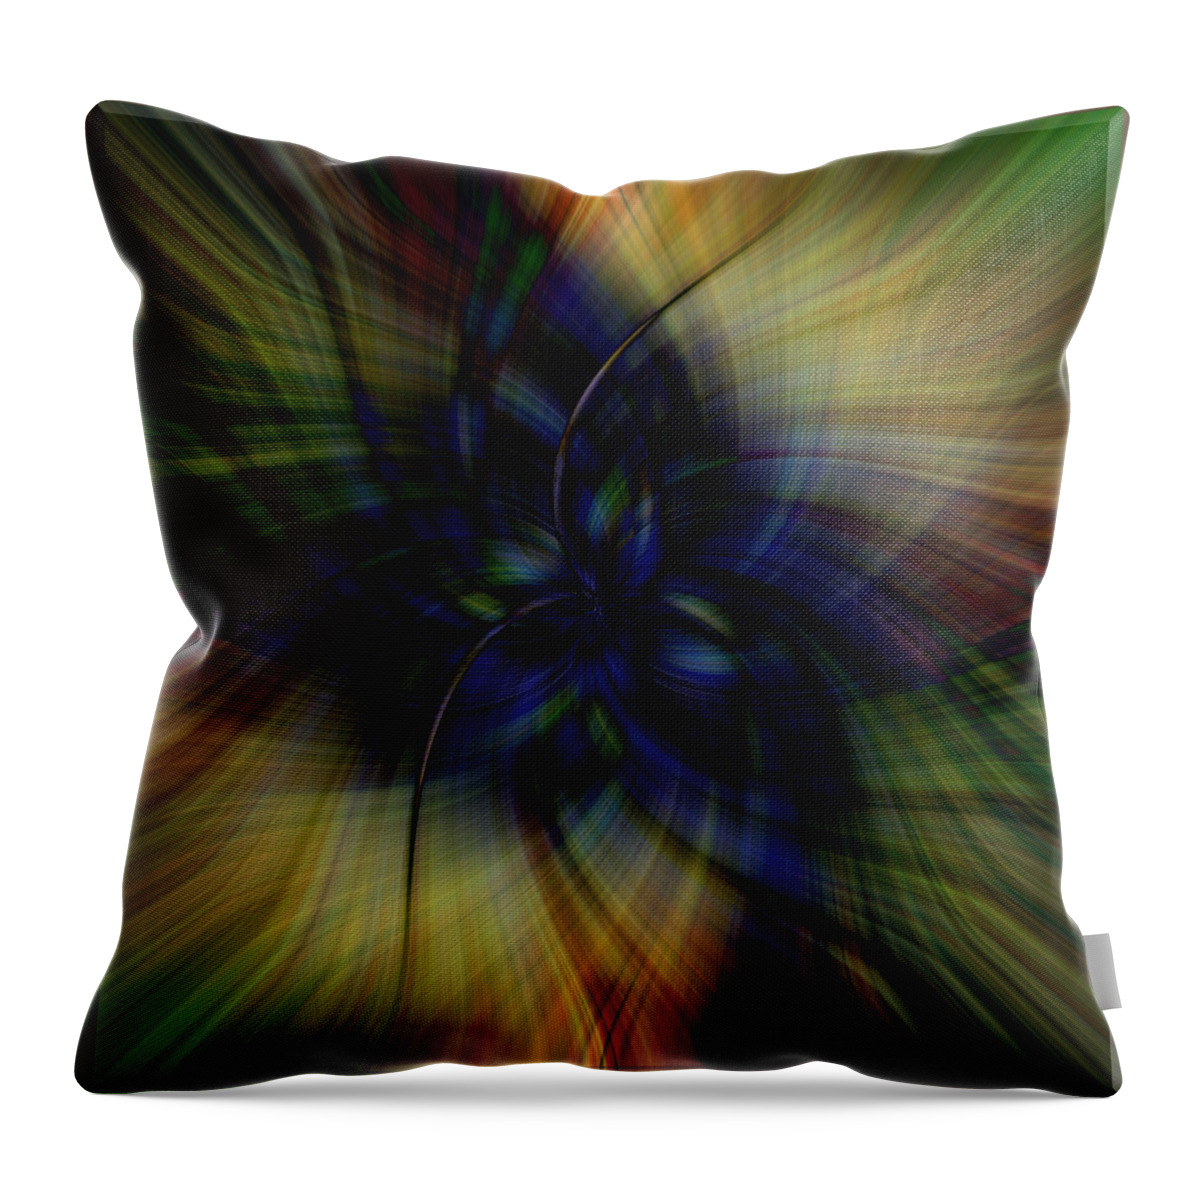 Design Throw Pillow featuring the digital art Deep Voodoo by Mark Myhaver